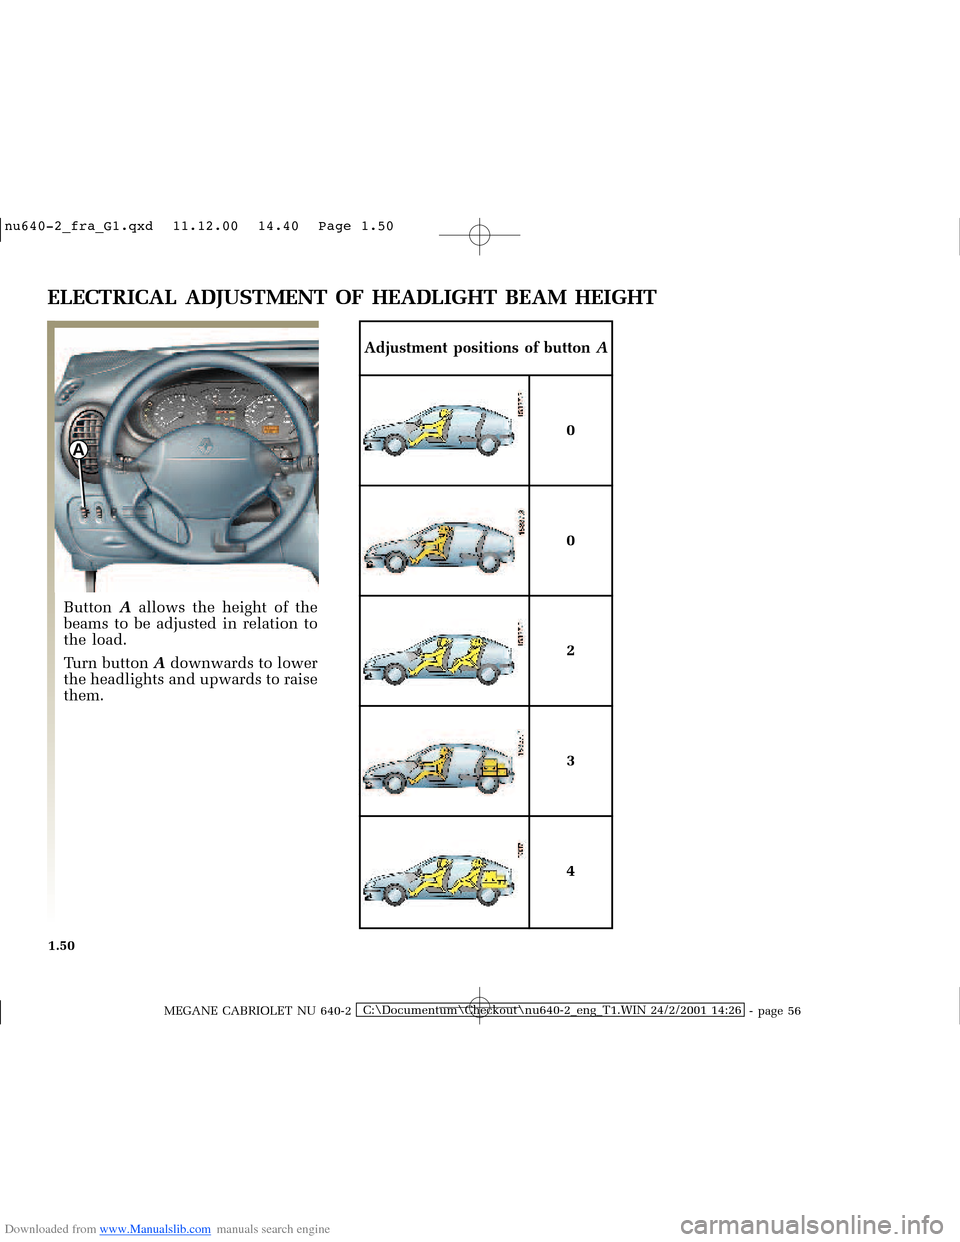 RENAULT MEGANE 2000 X64 / 1.G Owners Manual Downloaded from www.Manualslib.com manuals search engine A
�Q�X������B�I�U�D�B�*���T�[�G� � ��������� � ������ � �3�D�J�H� ����
MEGANE CABRIOLET NU 640-2C:\Documentum\Ch